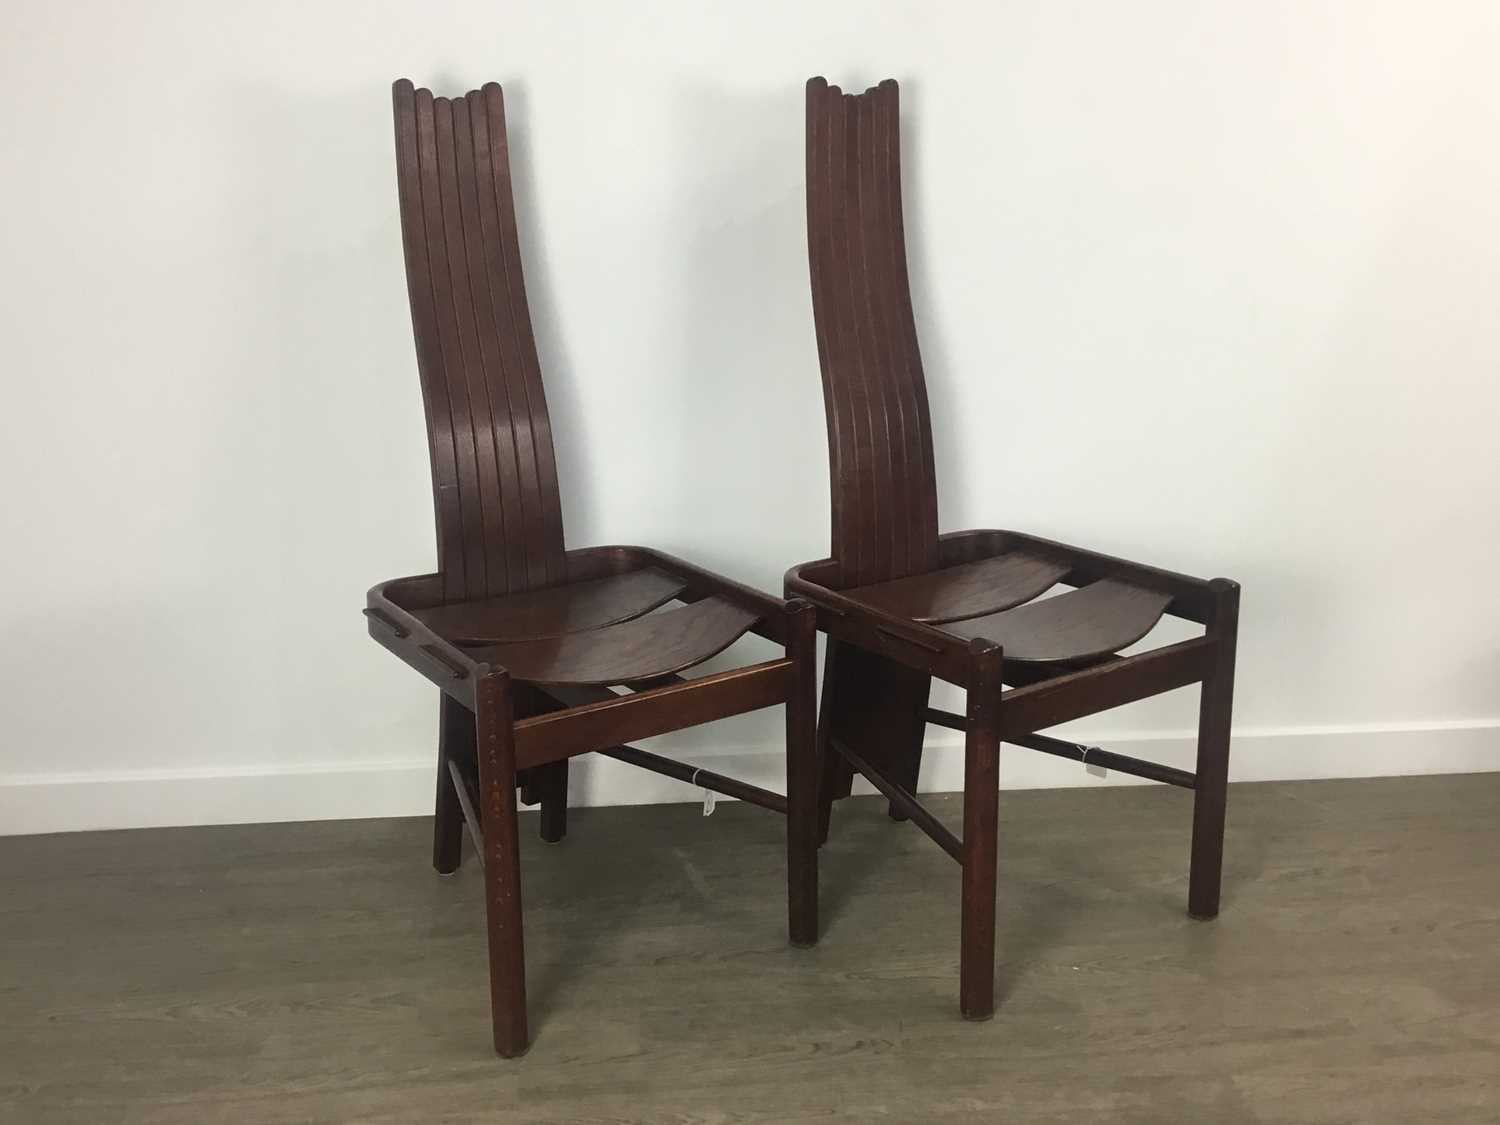 ATTRIBUTED TO ALLMILMÖ, SET OF FOUR BRUTALIST BENTWOOD CHAIRS, CIRCA 1980-89